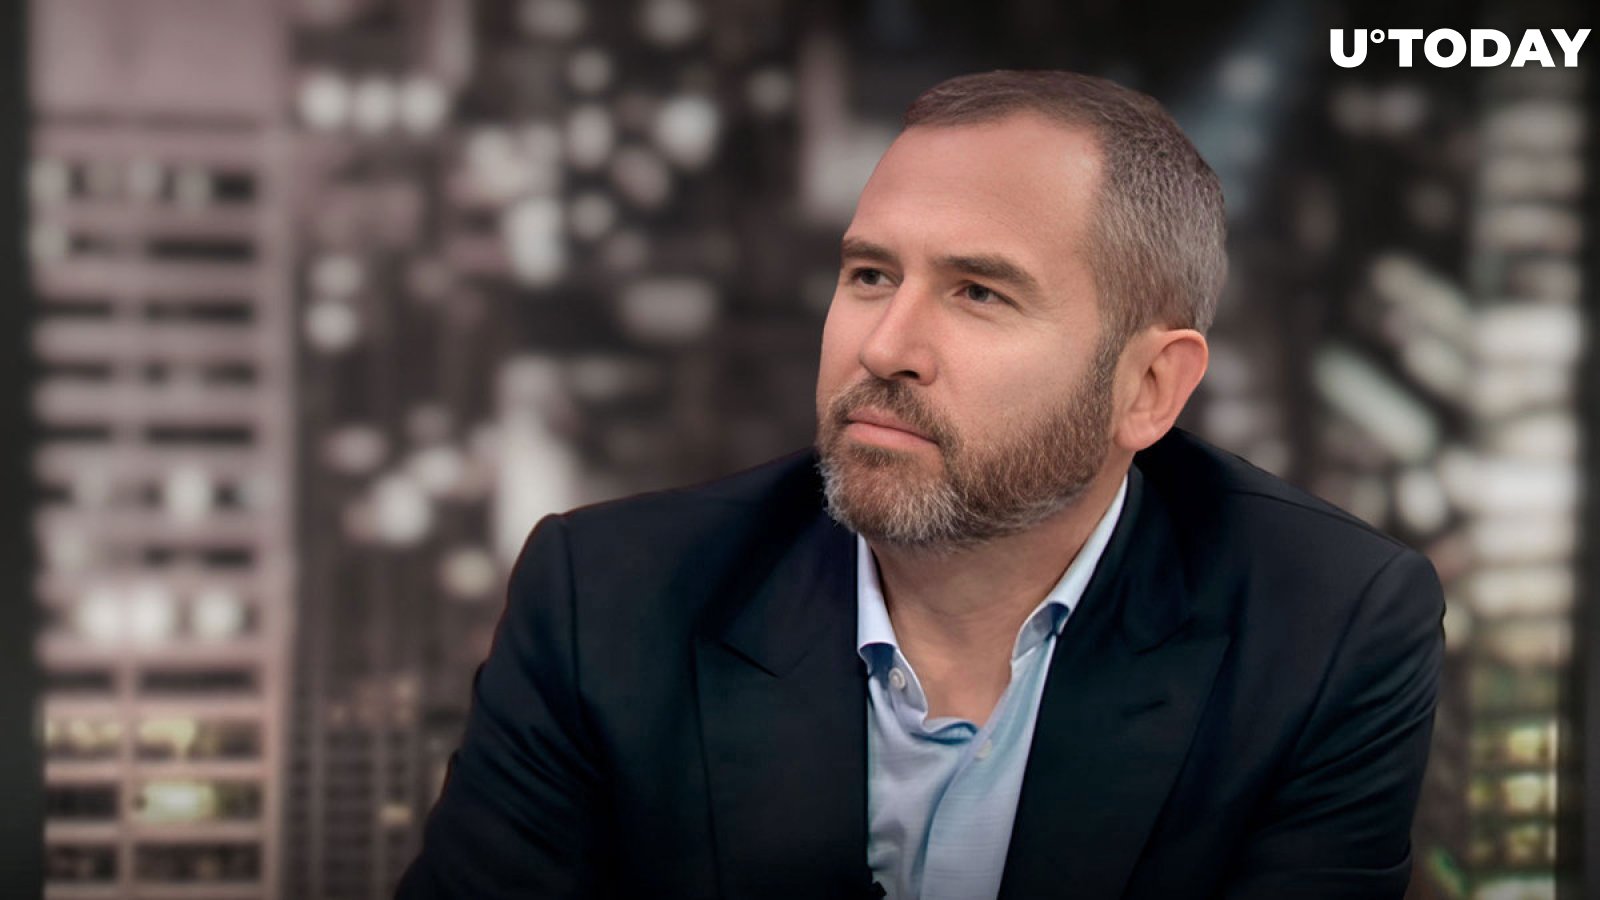 Ripple CEO Garlinghouse Opens up About IPO and Current Plans